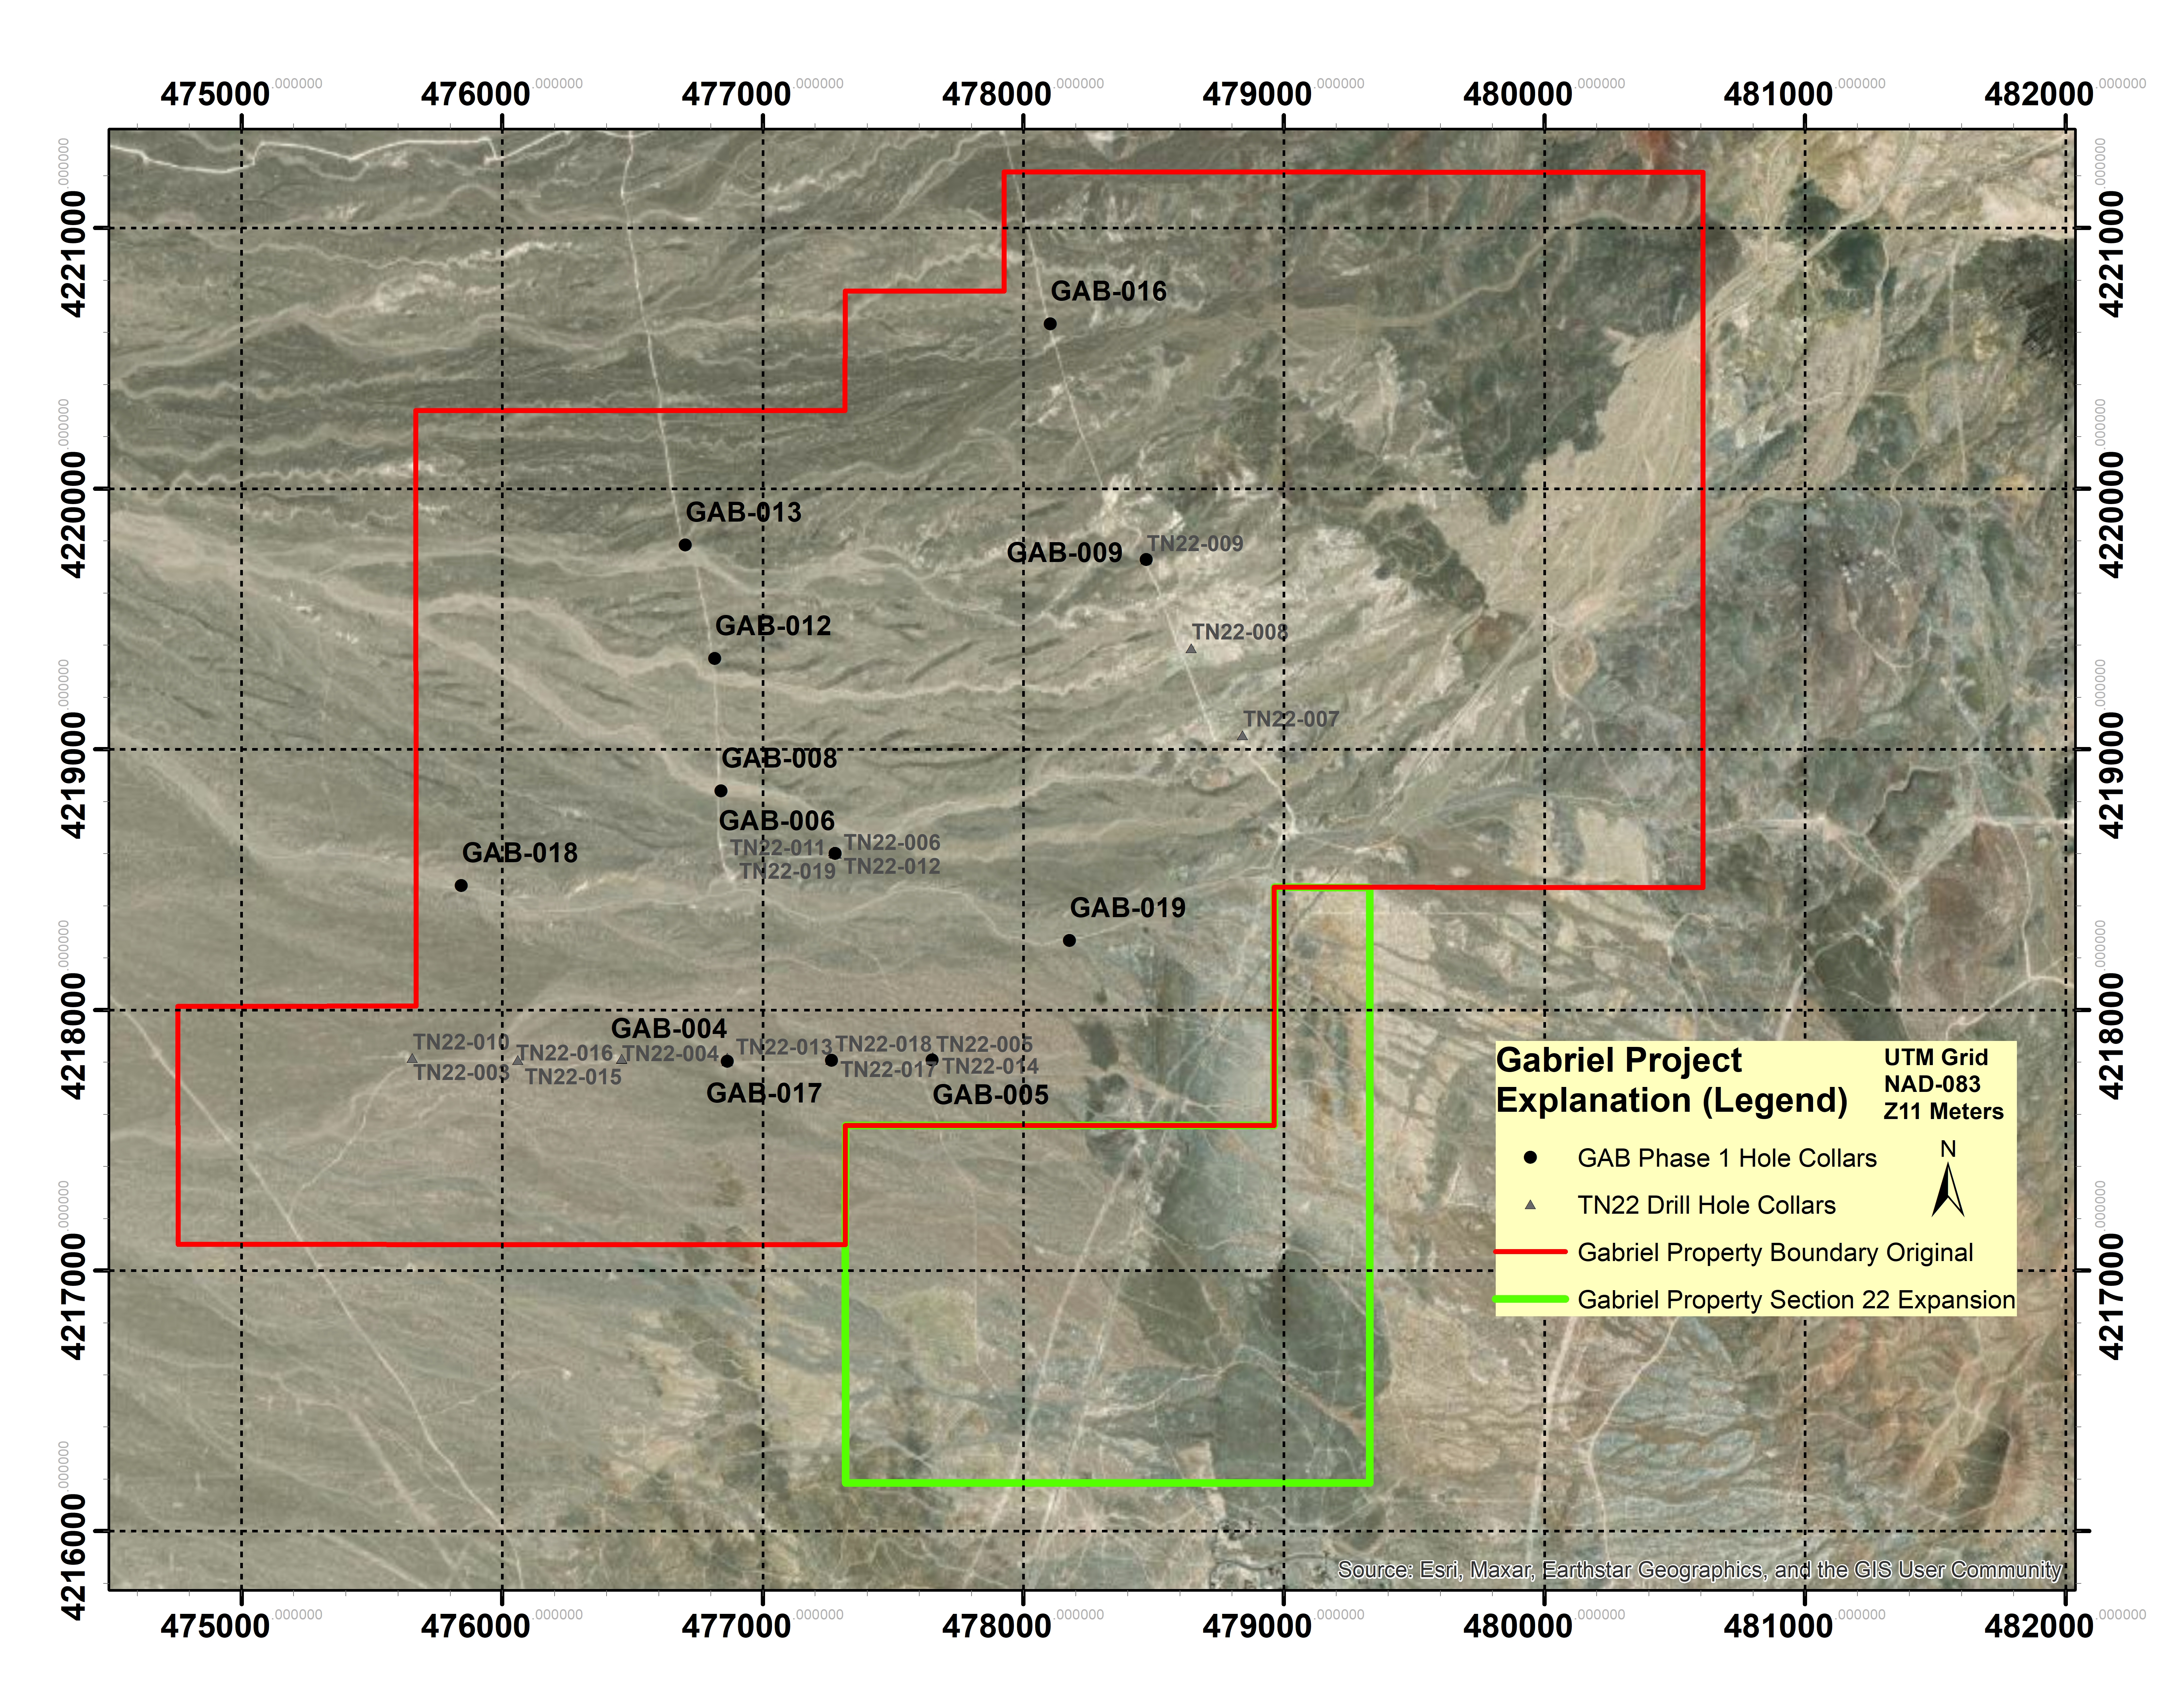 Gabriel Lithium Project Expanded Land Map